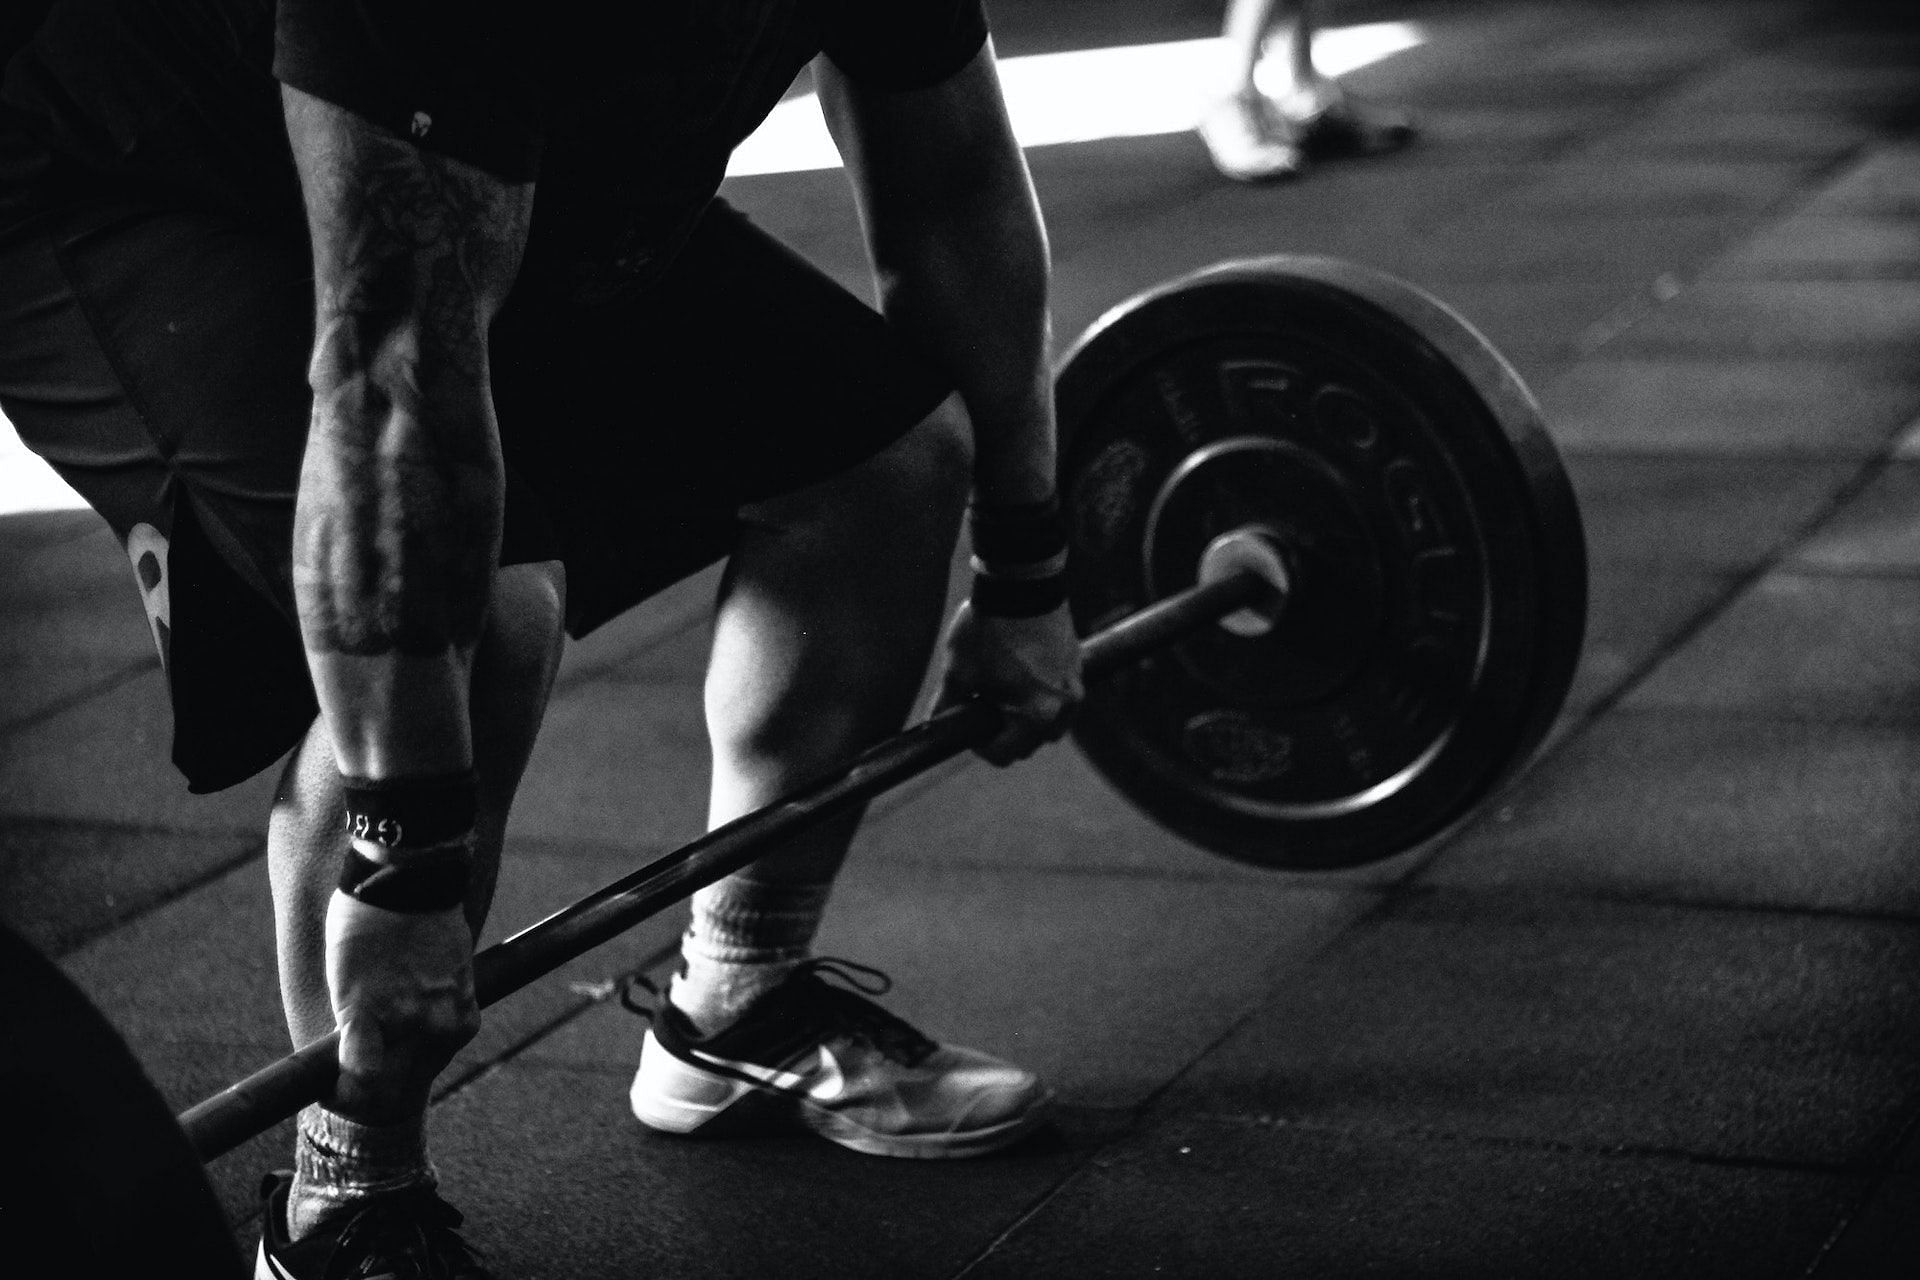 Lifting heavy weights can lead to rotator cuff injuries. (Photo via Pexels/Victor Freitas)